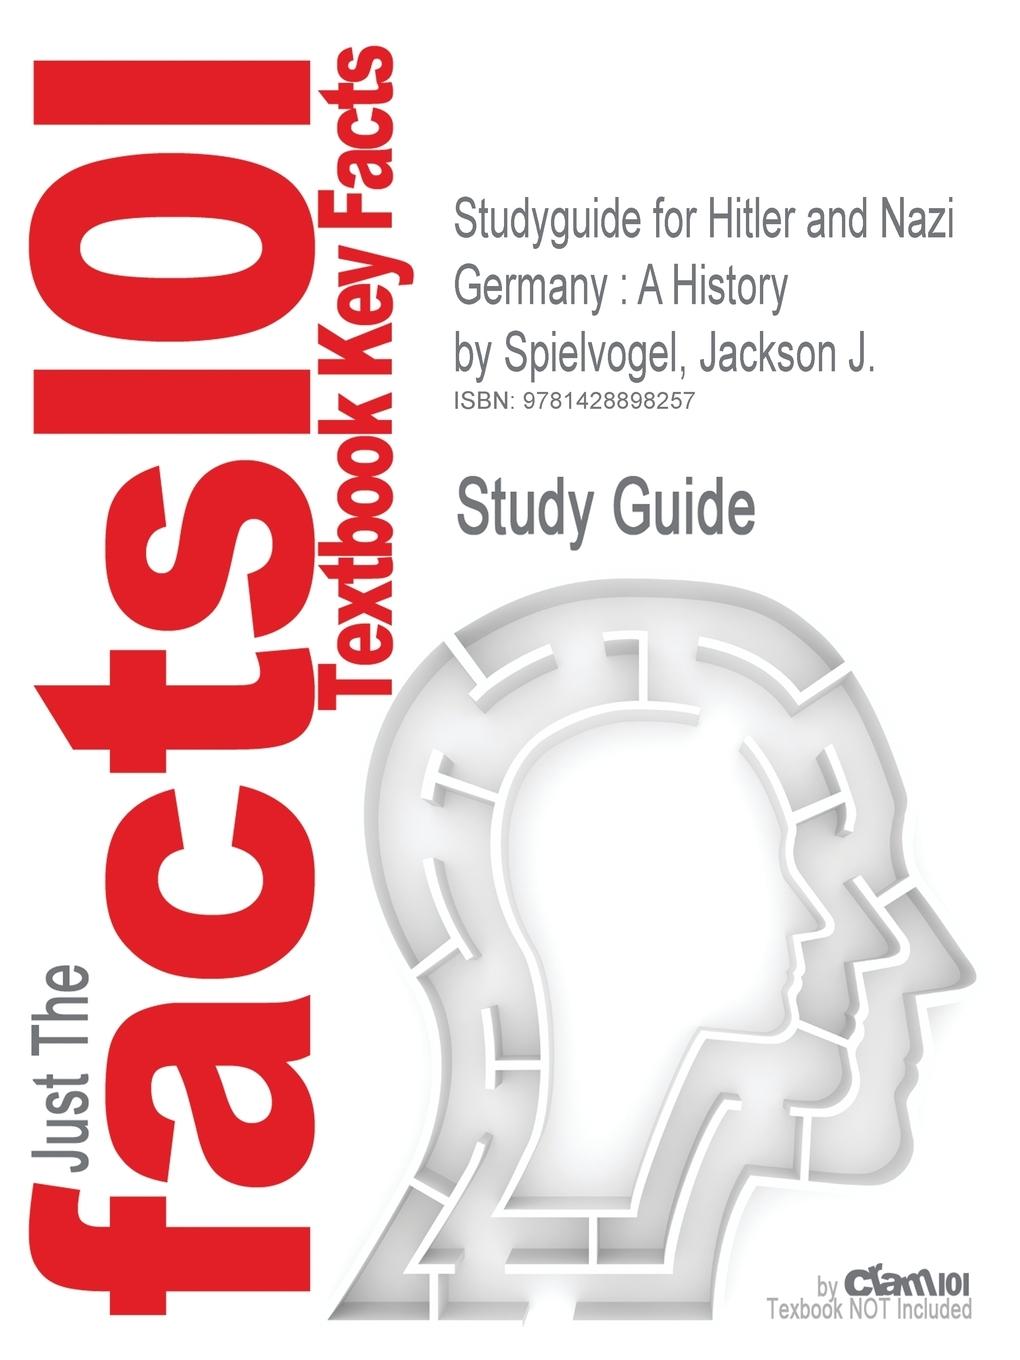 Studyguide for Hitler and Nazi Germany - Cram101 Textbook Reviews